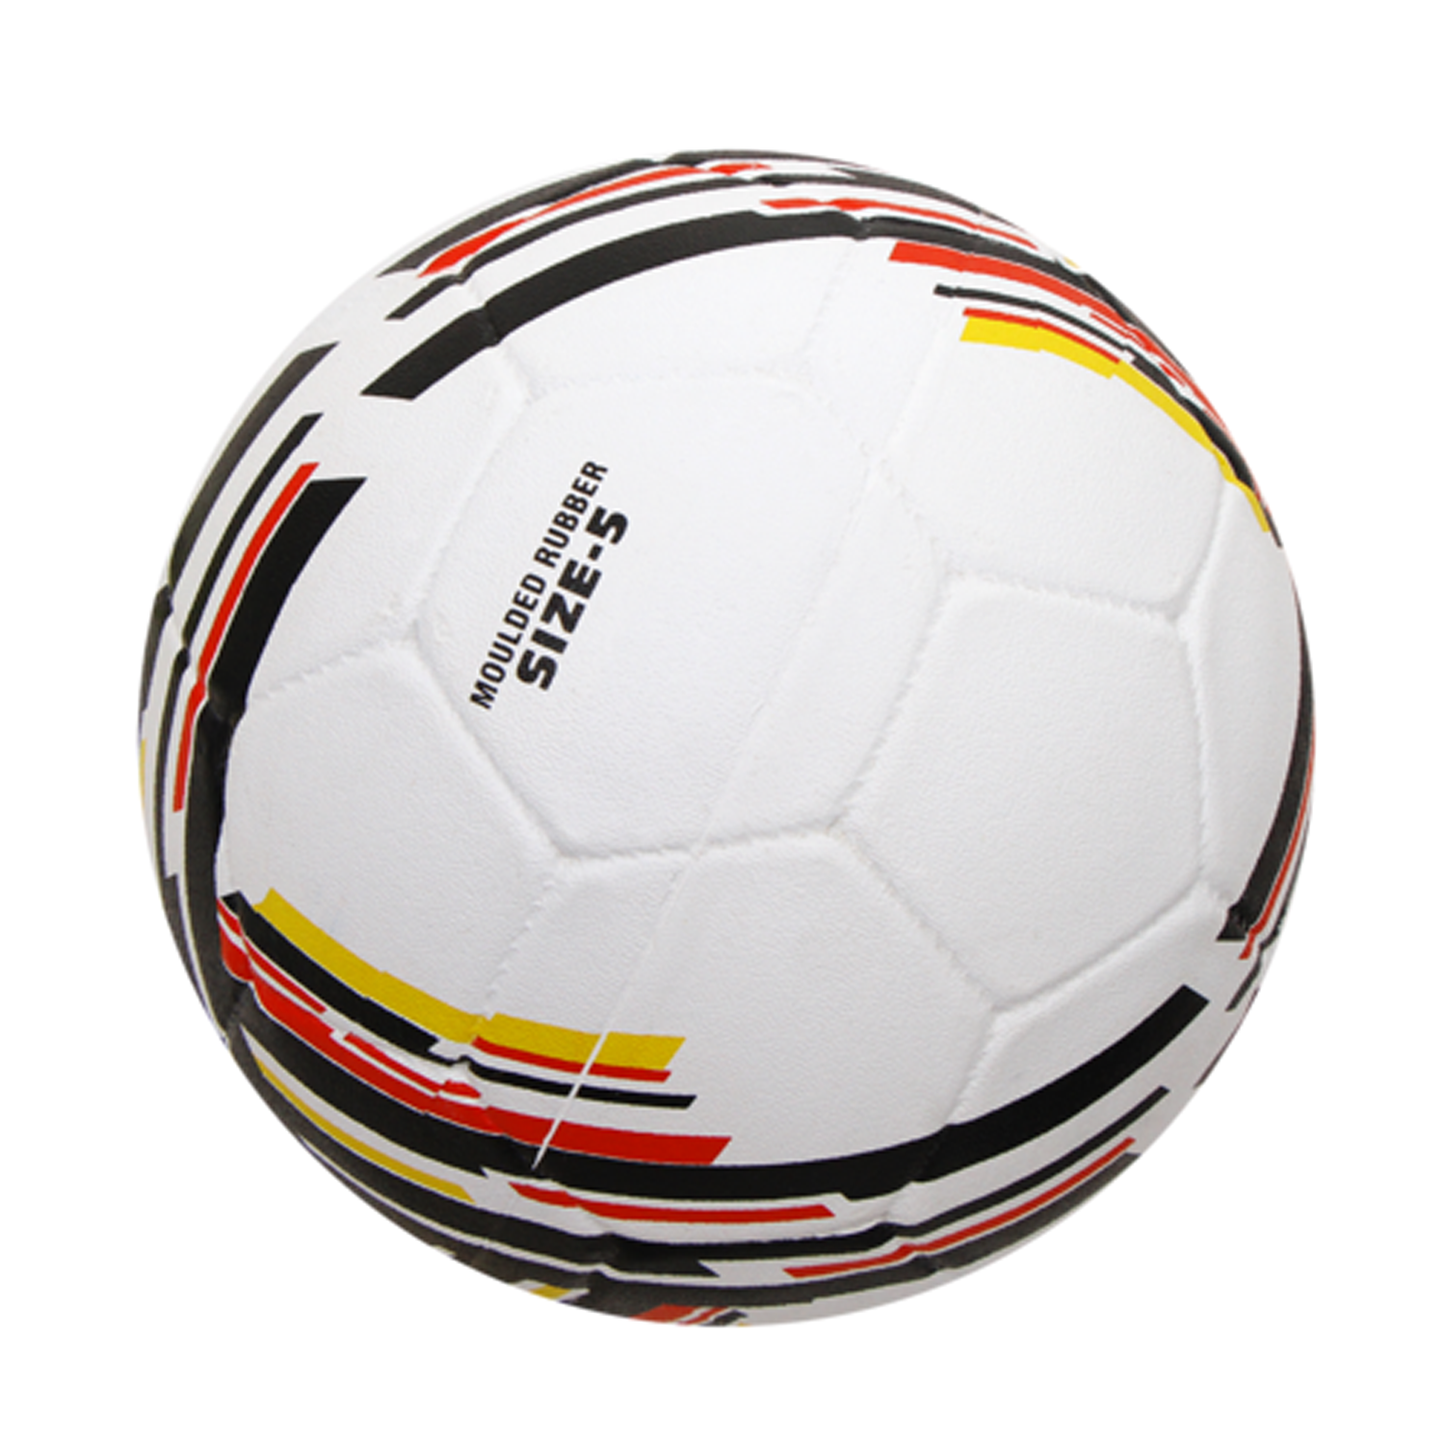 Nivia Germany Country Colour Football, Multi Colour - Size 5 - Best Price online Prokicksports.com